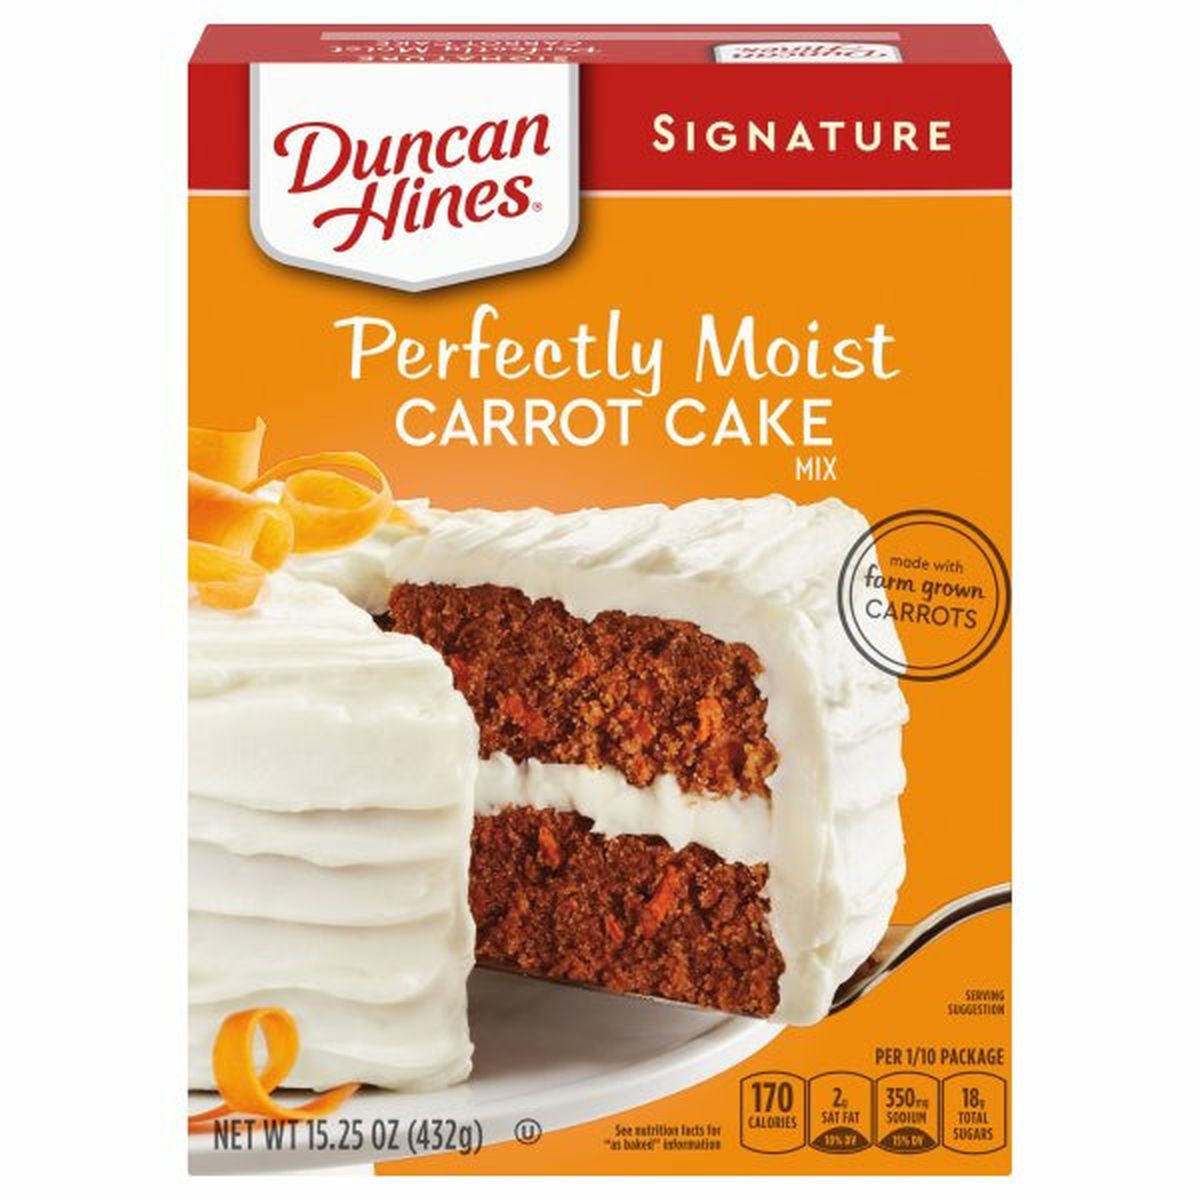 Calories in Duncan Hines Signature Cake Mix, Carrot, Perfectly Moist